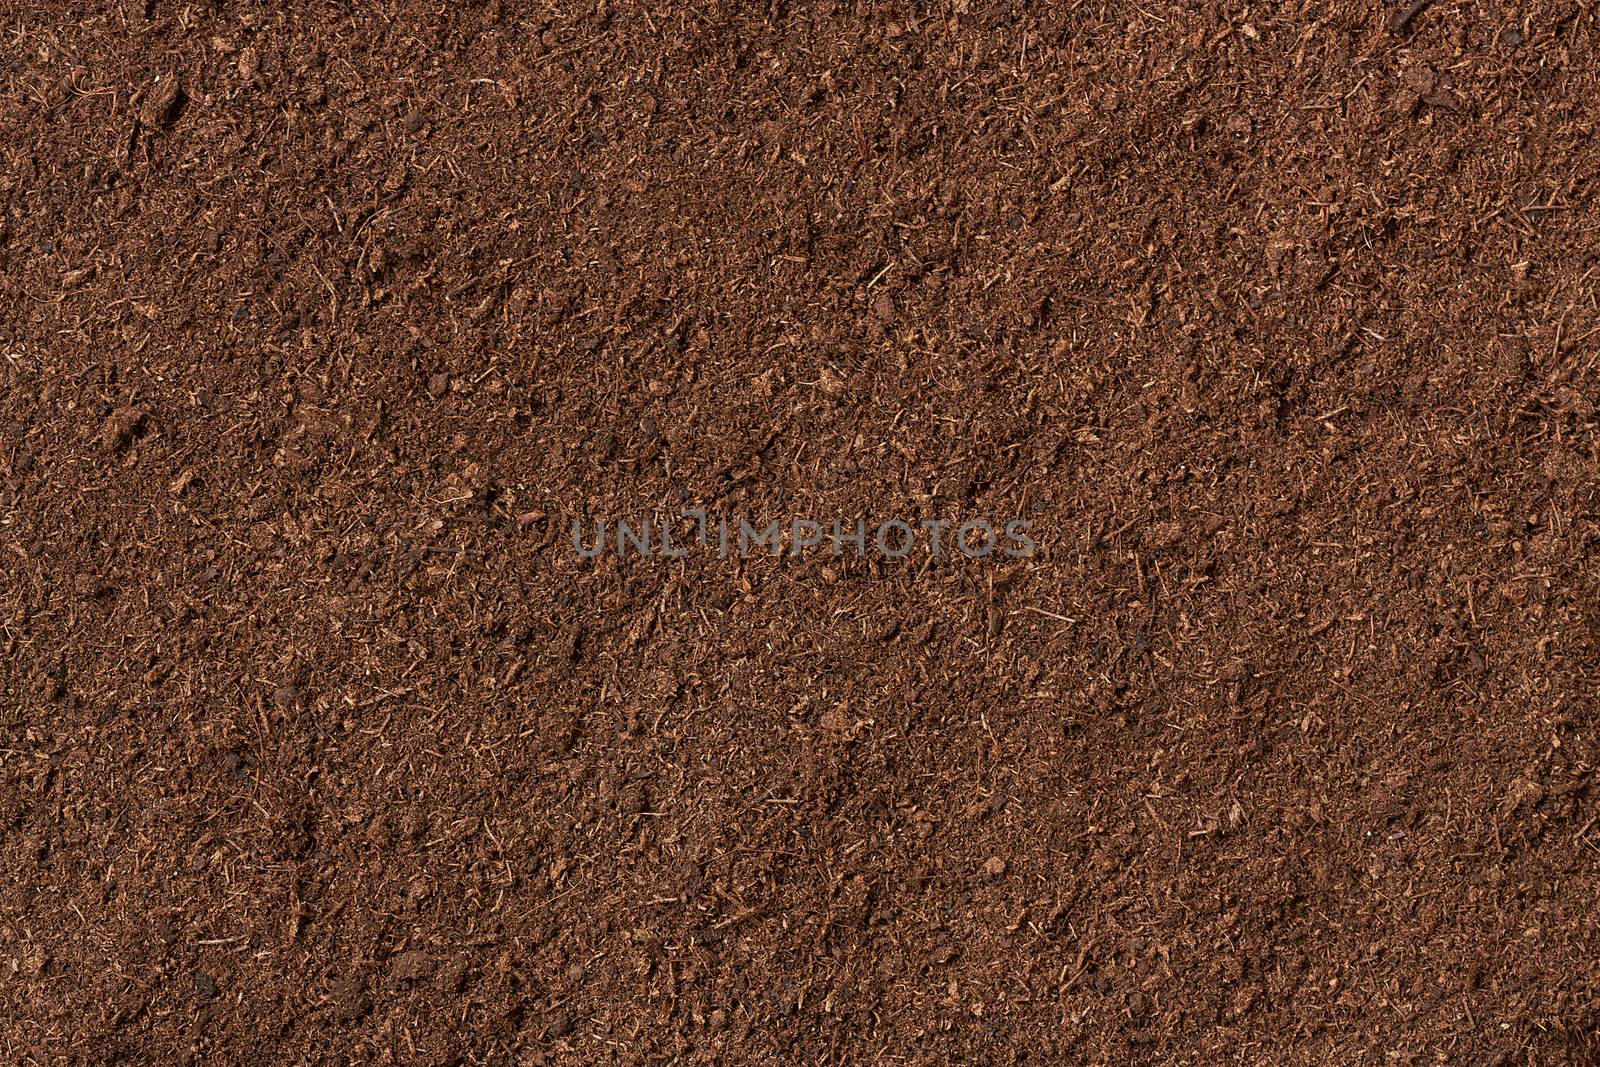 peat soil as a background, organic texture